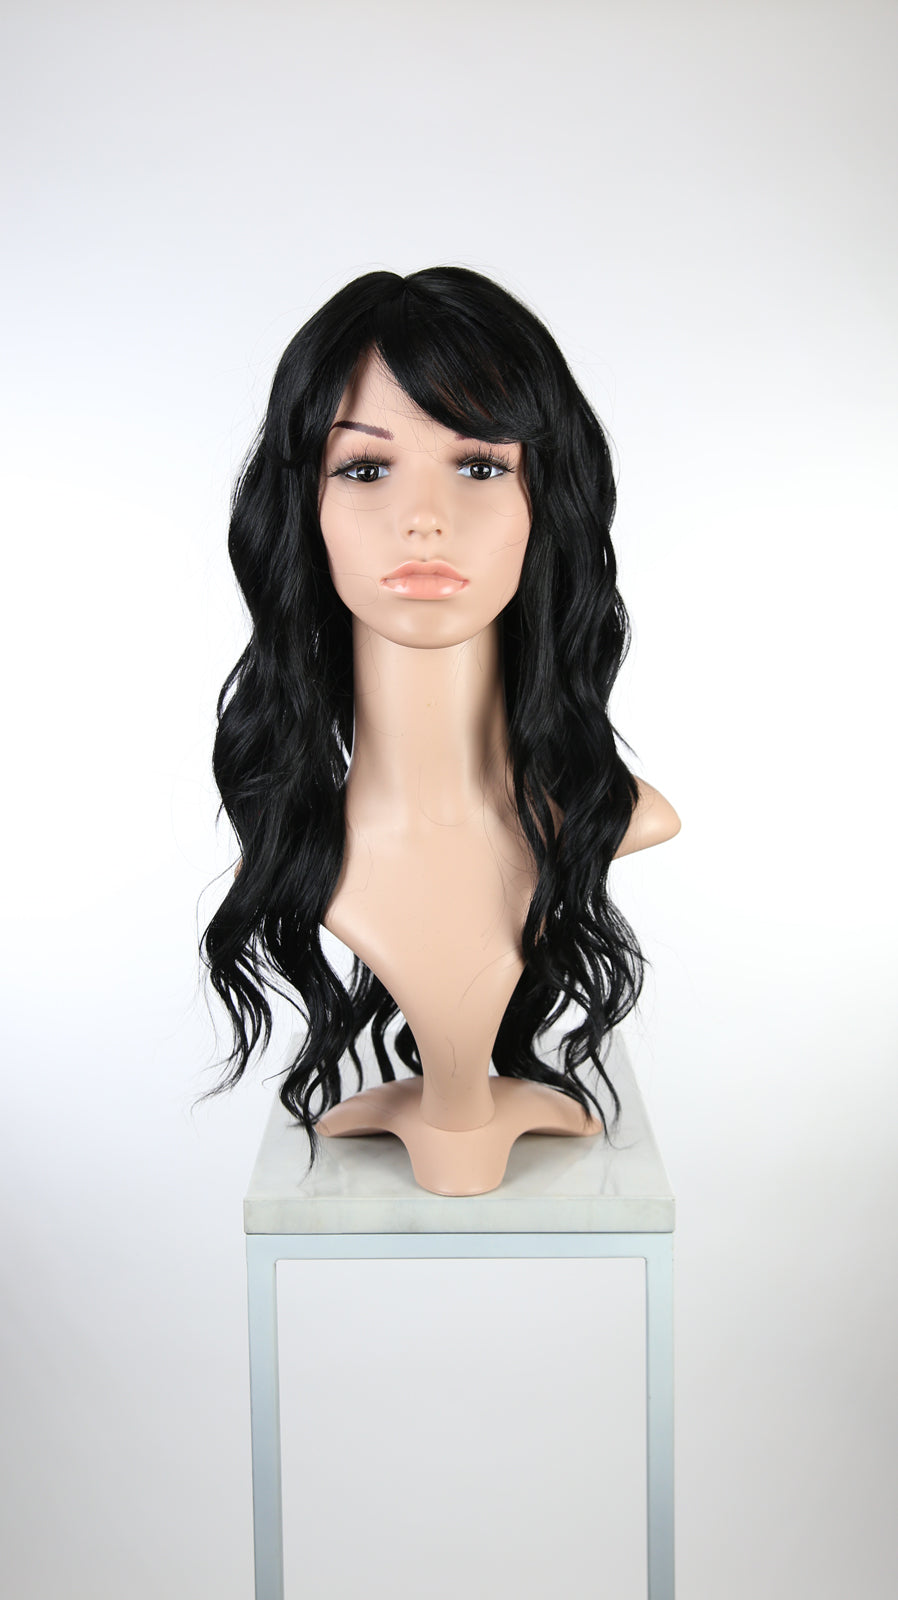 Black Long Curly Hair with Bangs Fashion Wig - Large 23" size - HSFAN1